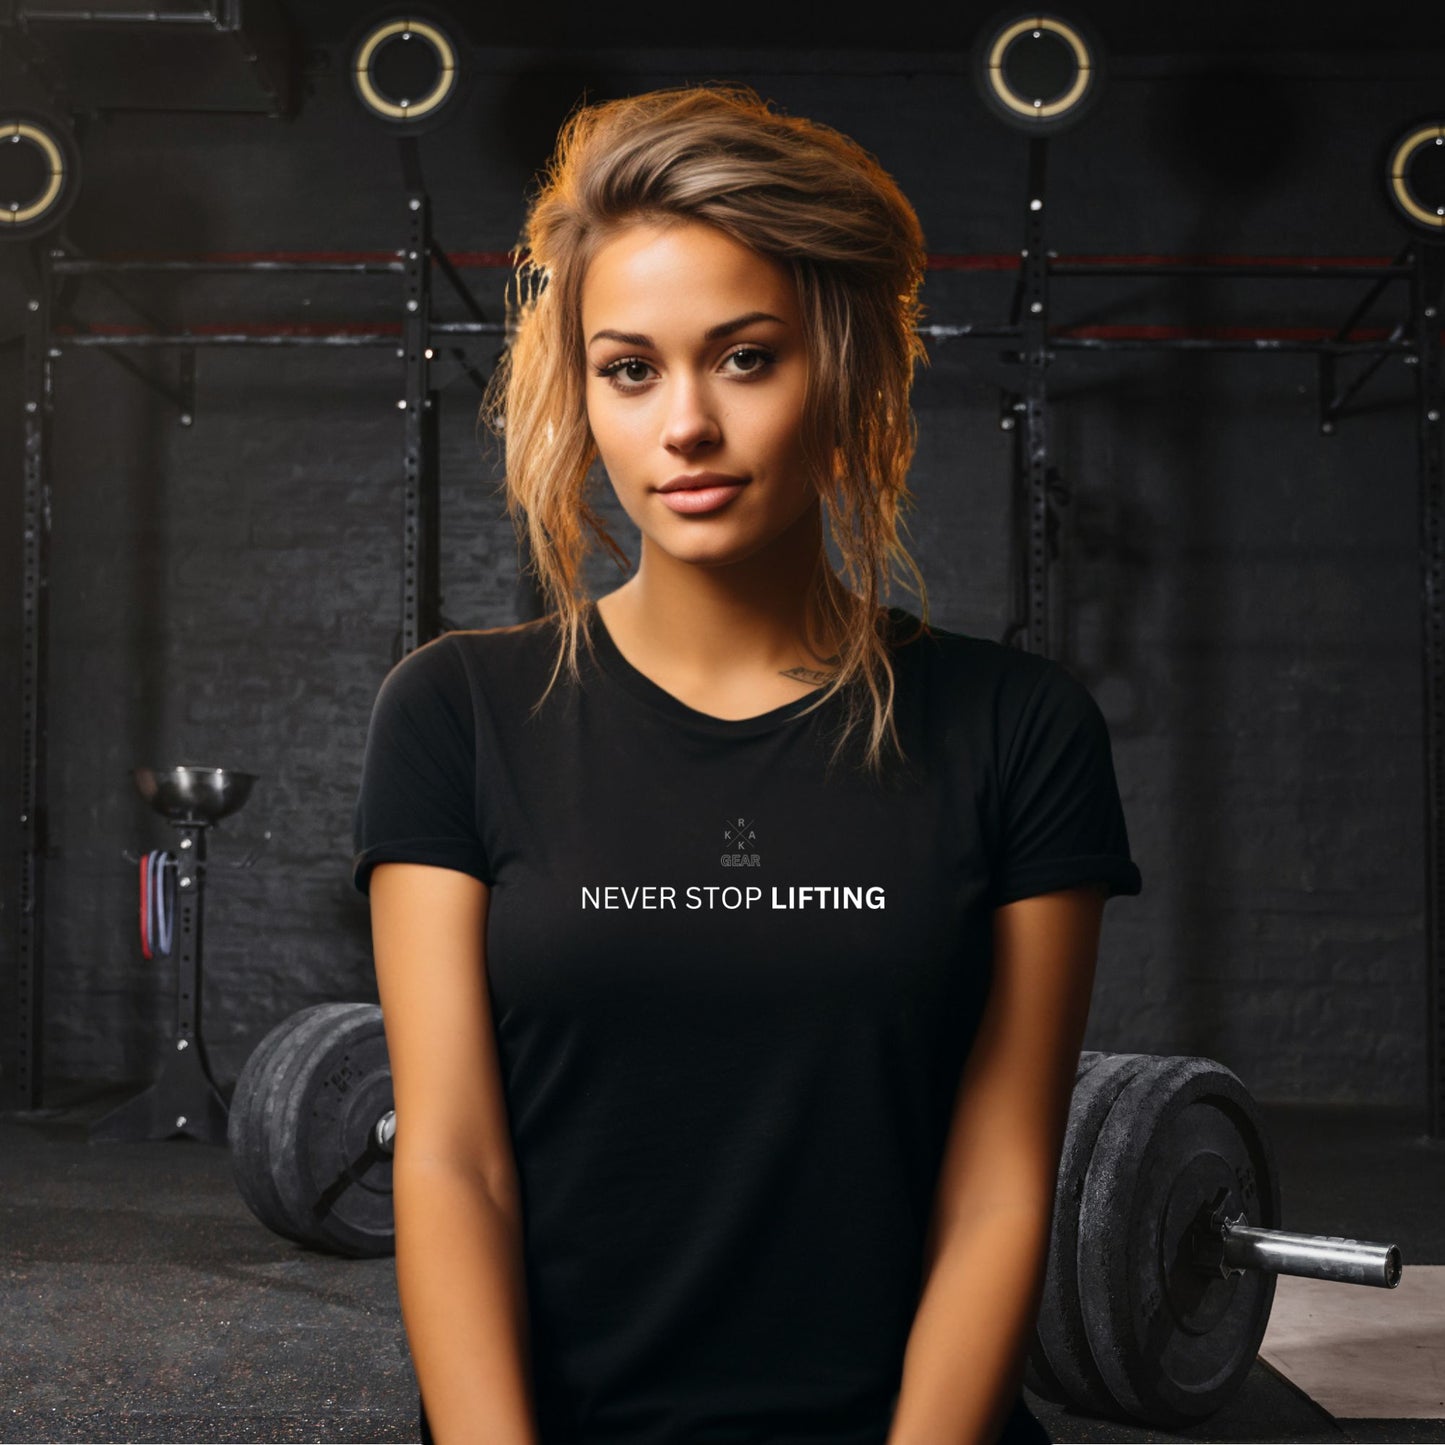 Rakkgear 'Never Stop Lifting' Black T-Shirt with Rakkgear X Logo on the front, 'Never Stop Lifting' slogan, and iconic Rakkgear Logo on inner collar.